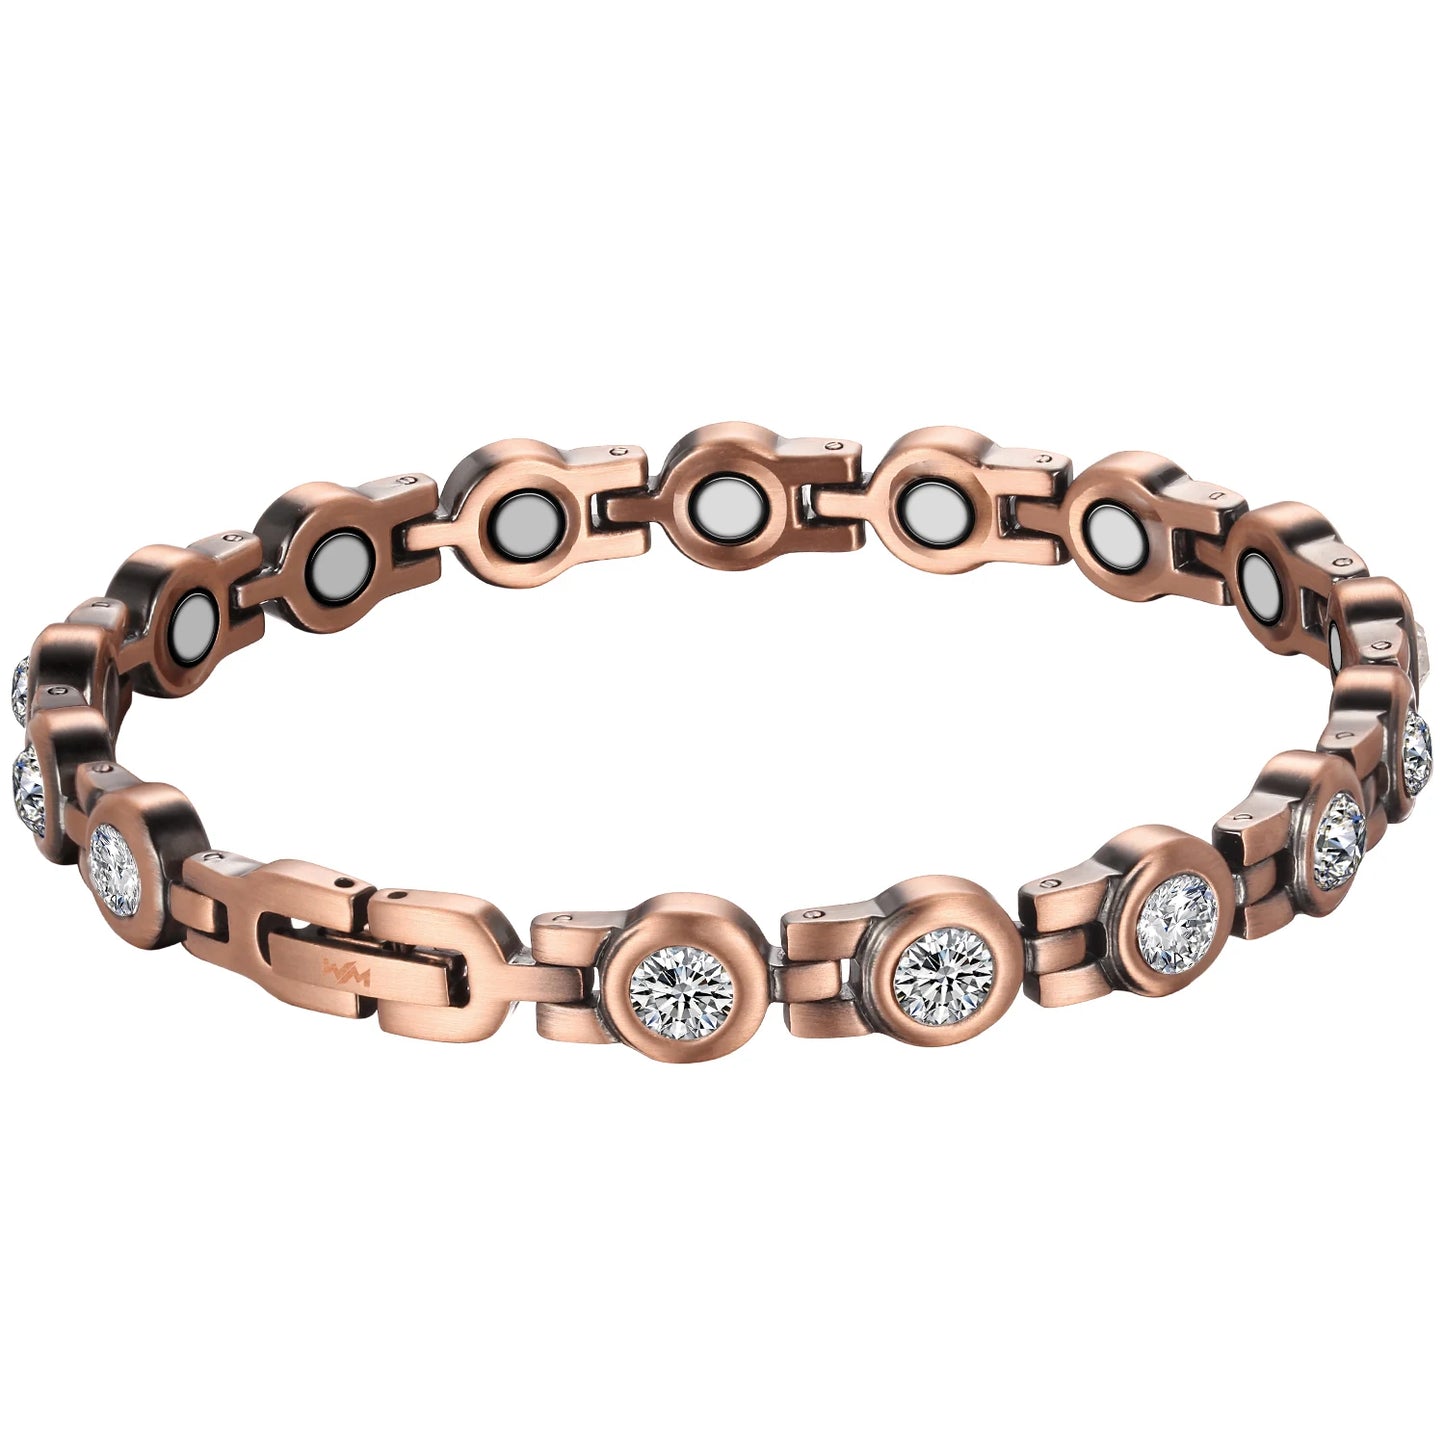 Women's Copper Crystal Magnetic Therapy Bracelet